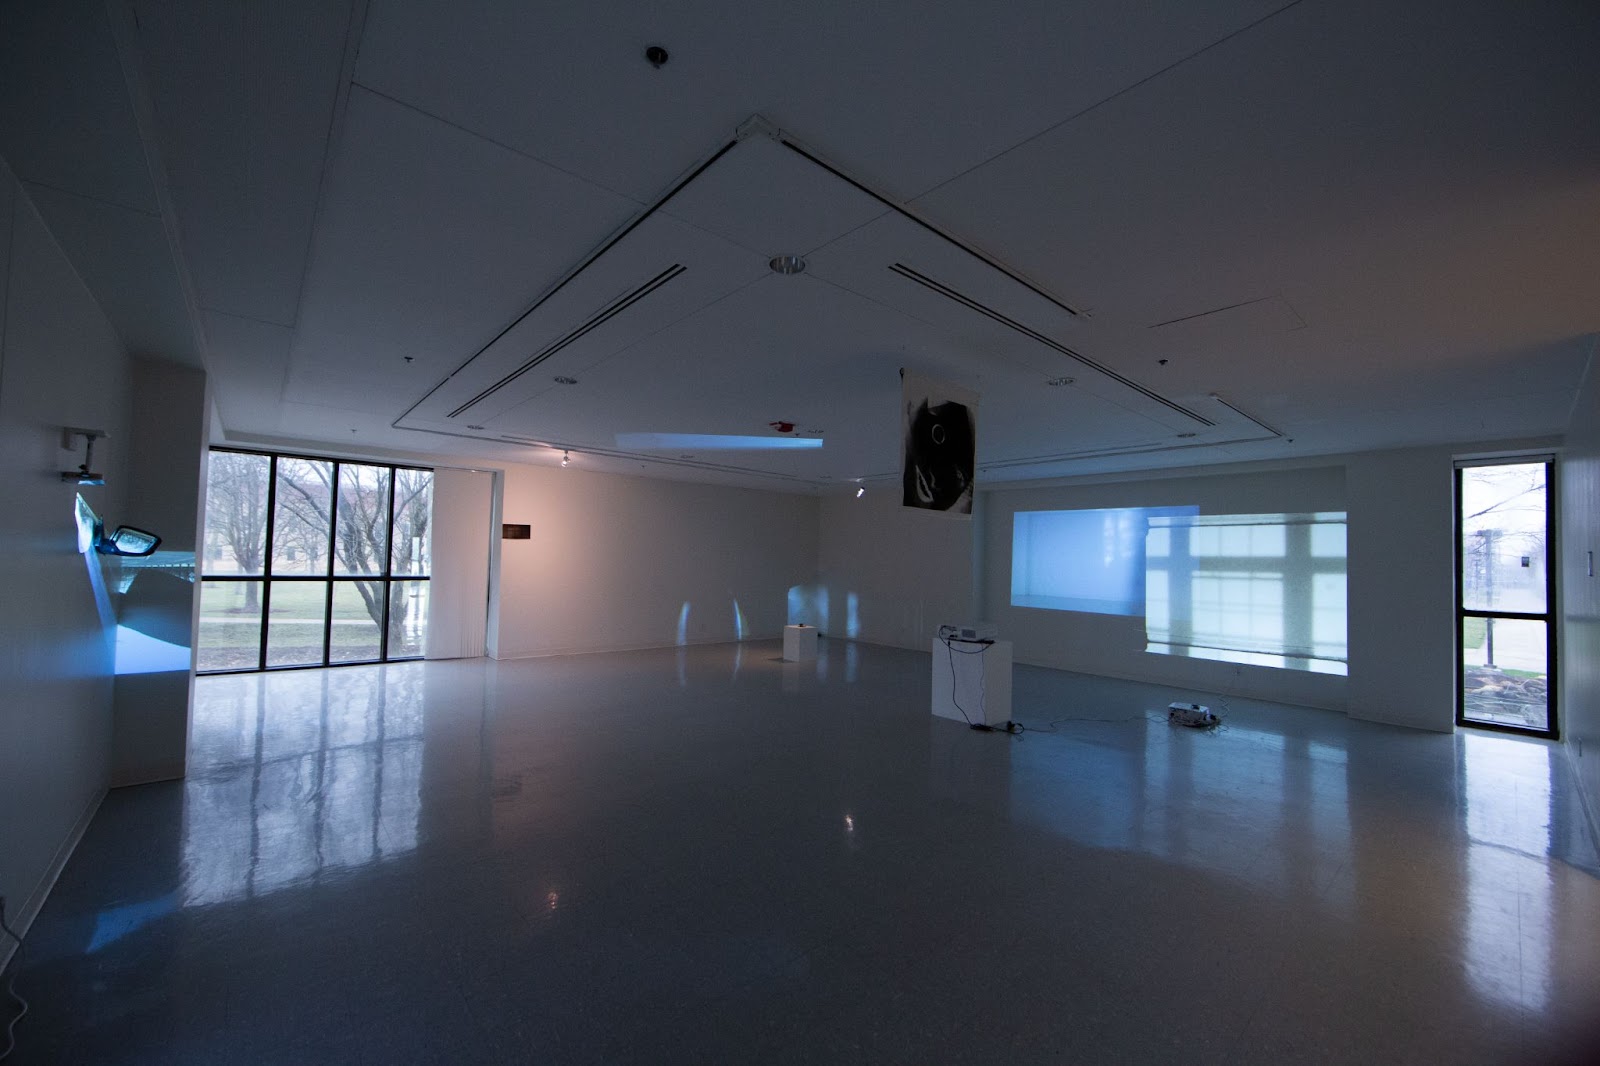 Image: Installation view, Ruby Que, Consider a Disappearance. Several projectors cast bluish, spectral light onto the walls of a dimly-lit gallery. A large paned window in the left corner of the room reflects on the floor. Photo by Ruby Que